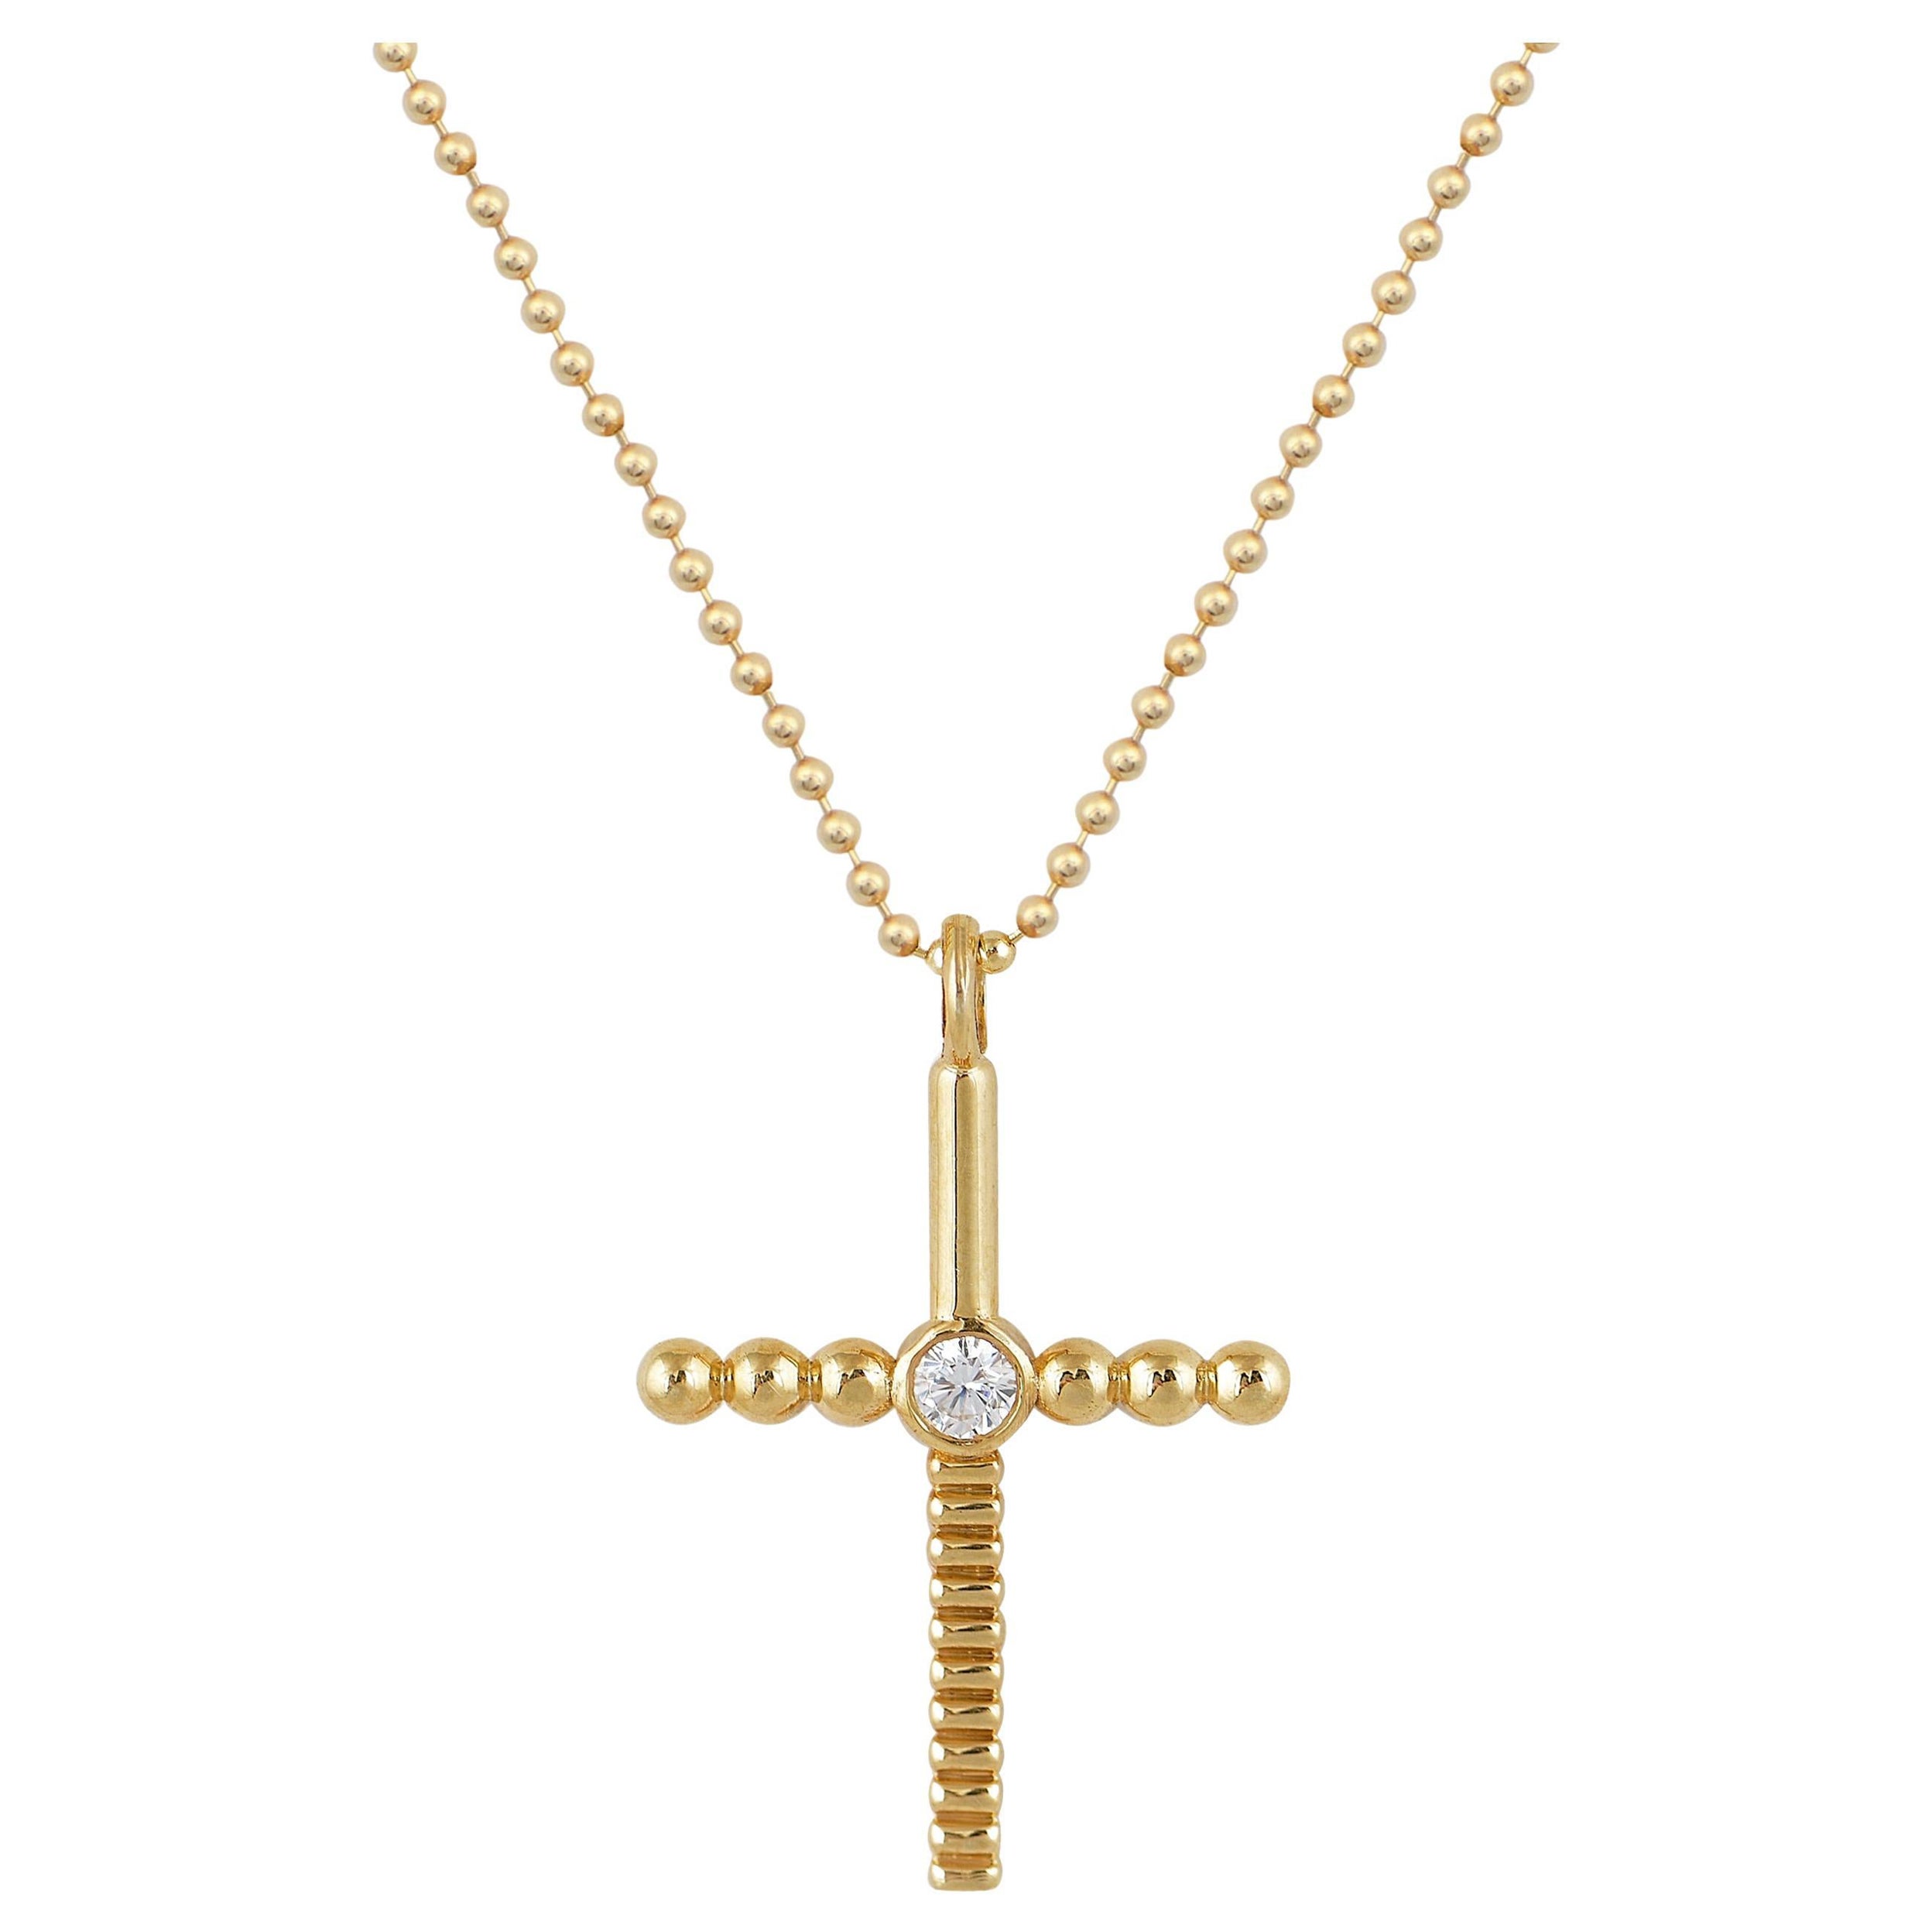 Interchangeable Cross Pendant in 18 Karat Yellow Gold with a Diamond For Sale